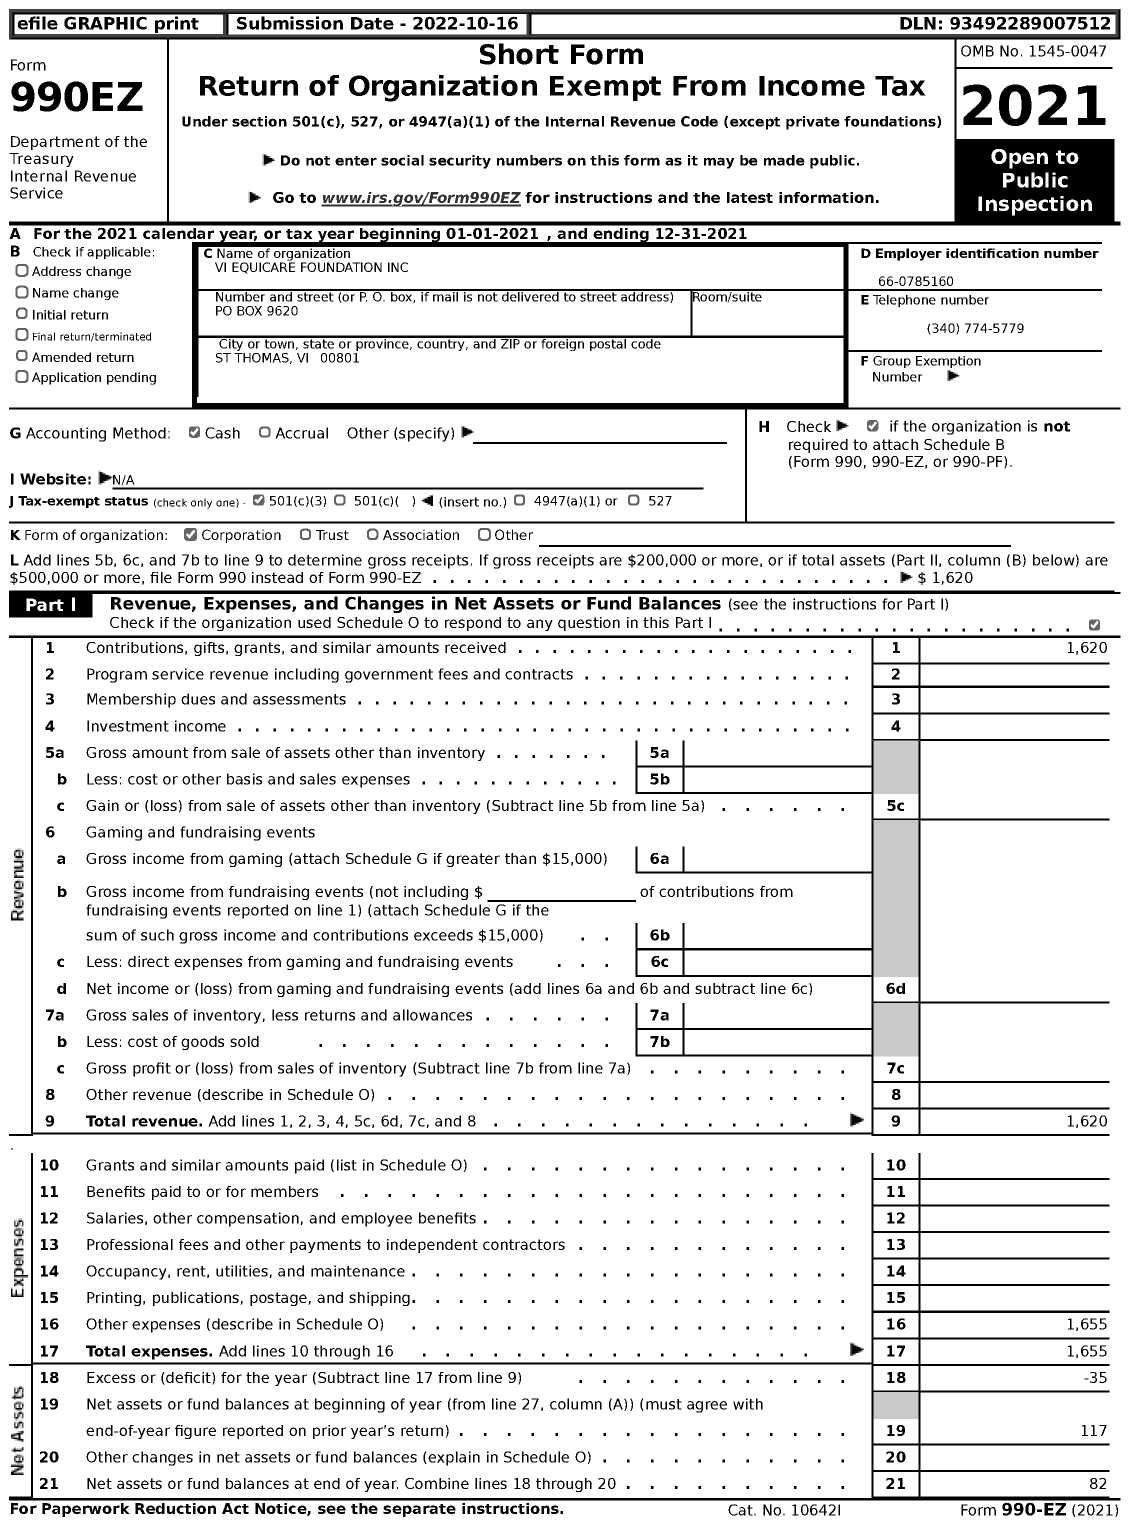 Image of first page of 2021 Form 990EZ for Vi Equicare Foundation